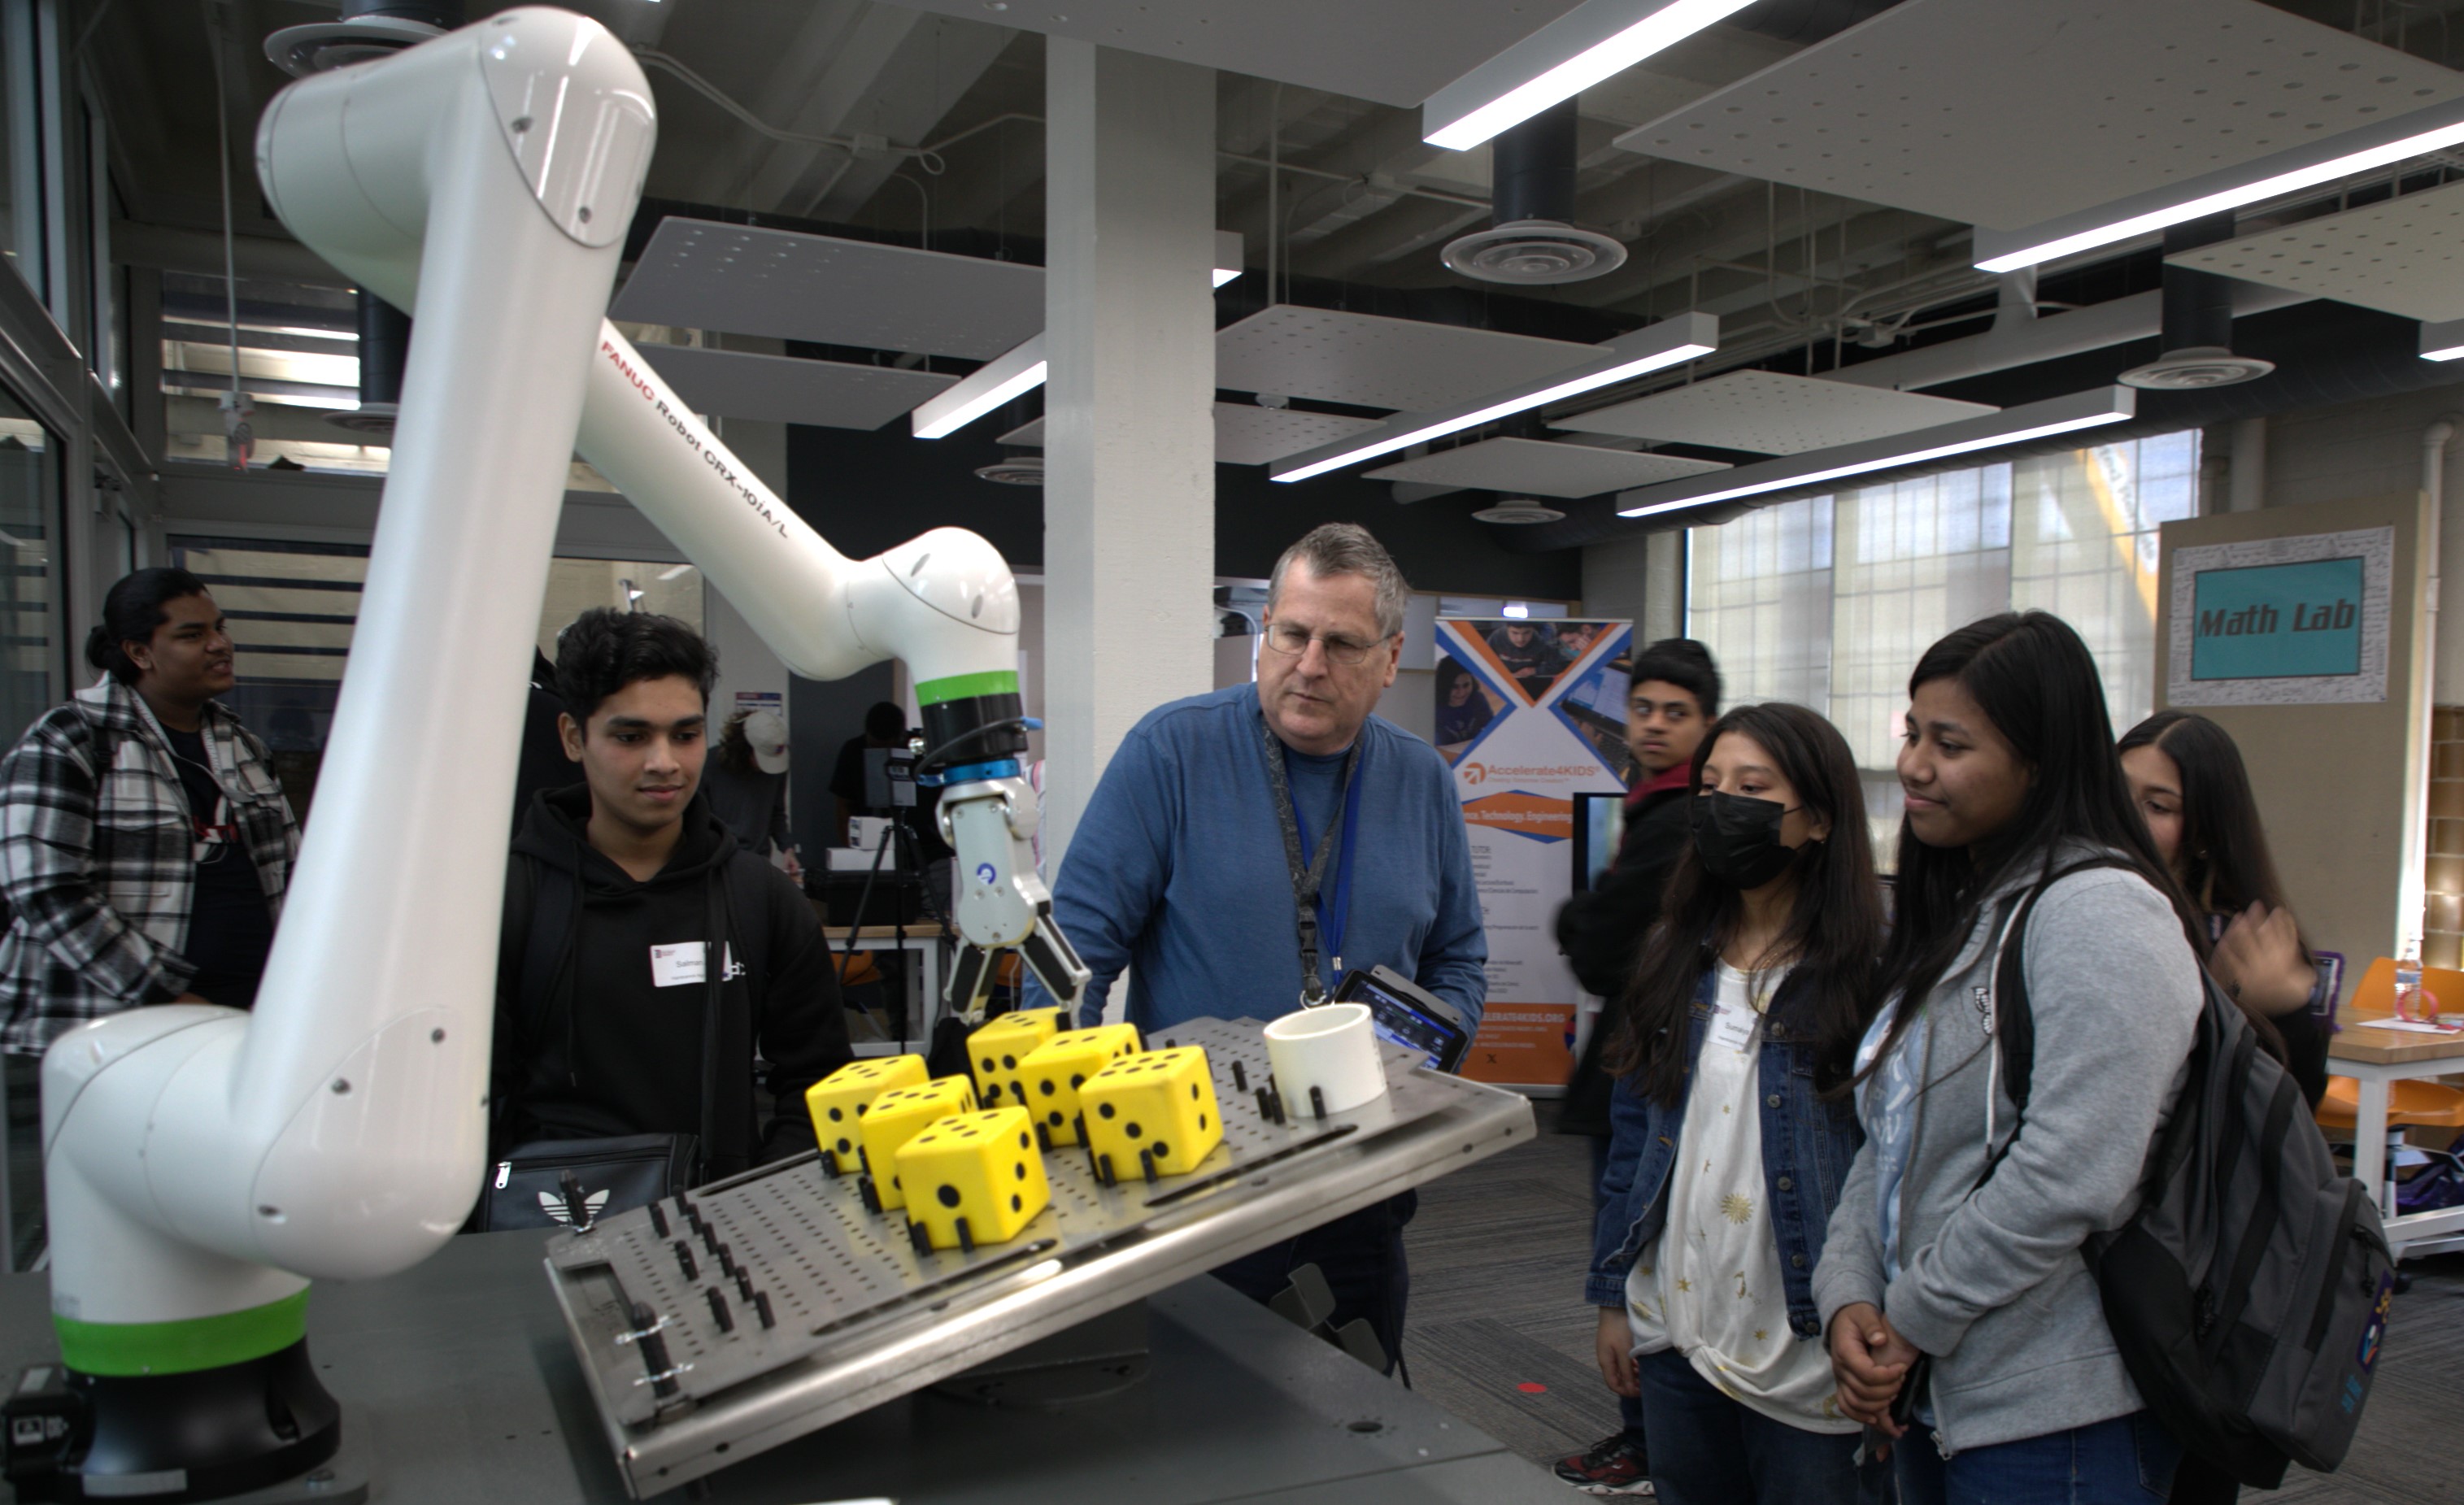 robotic arm being show by a prof to students